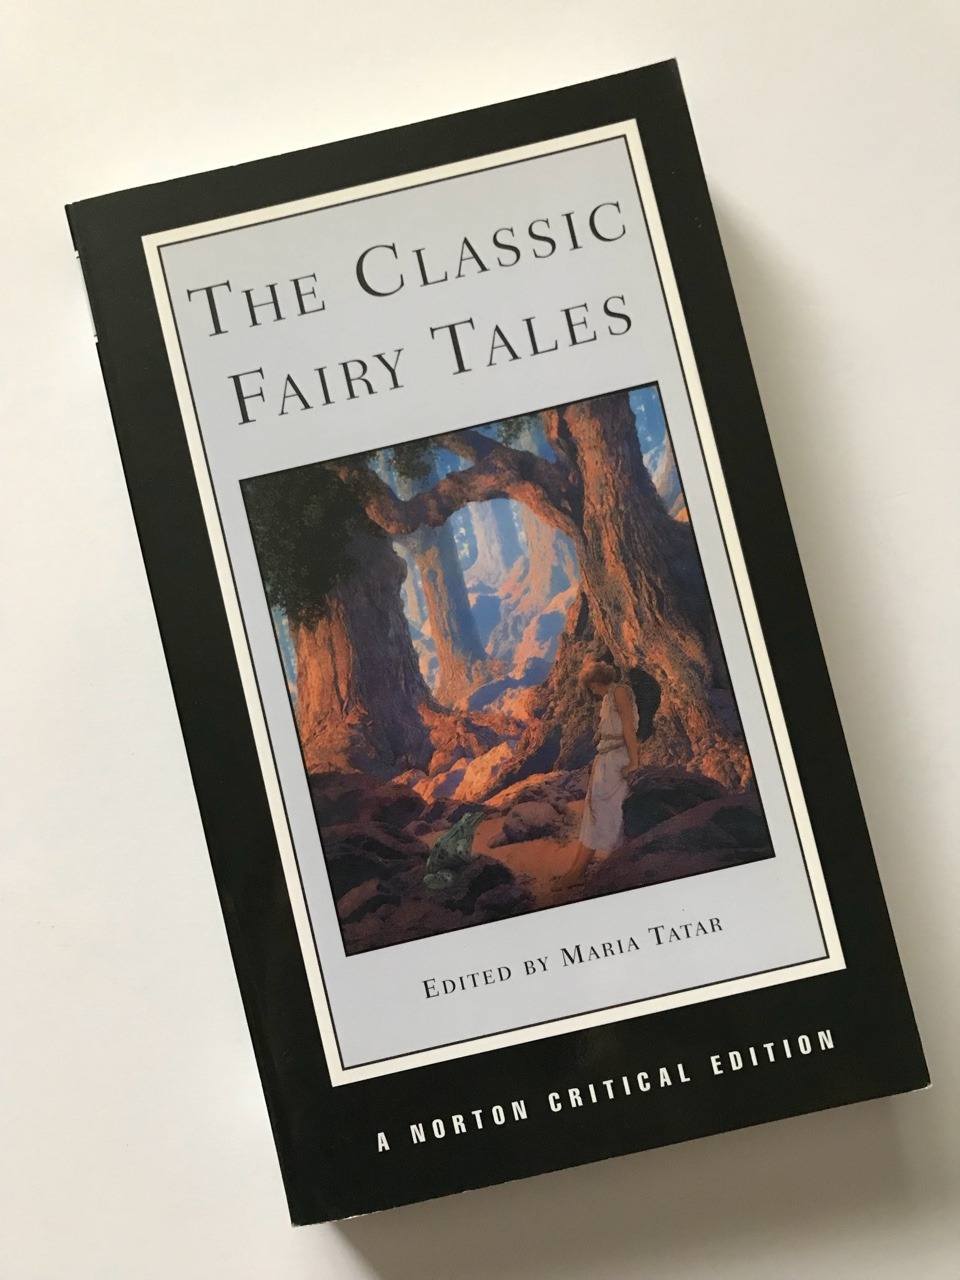 the classic fairy tales by maria tatar